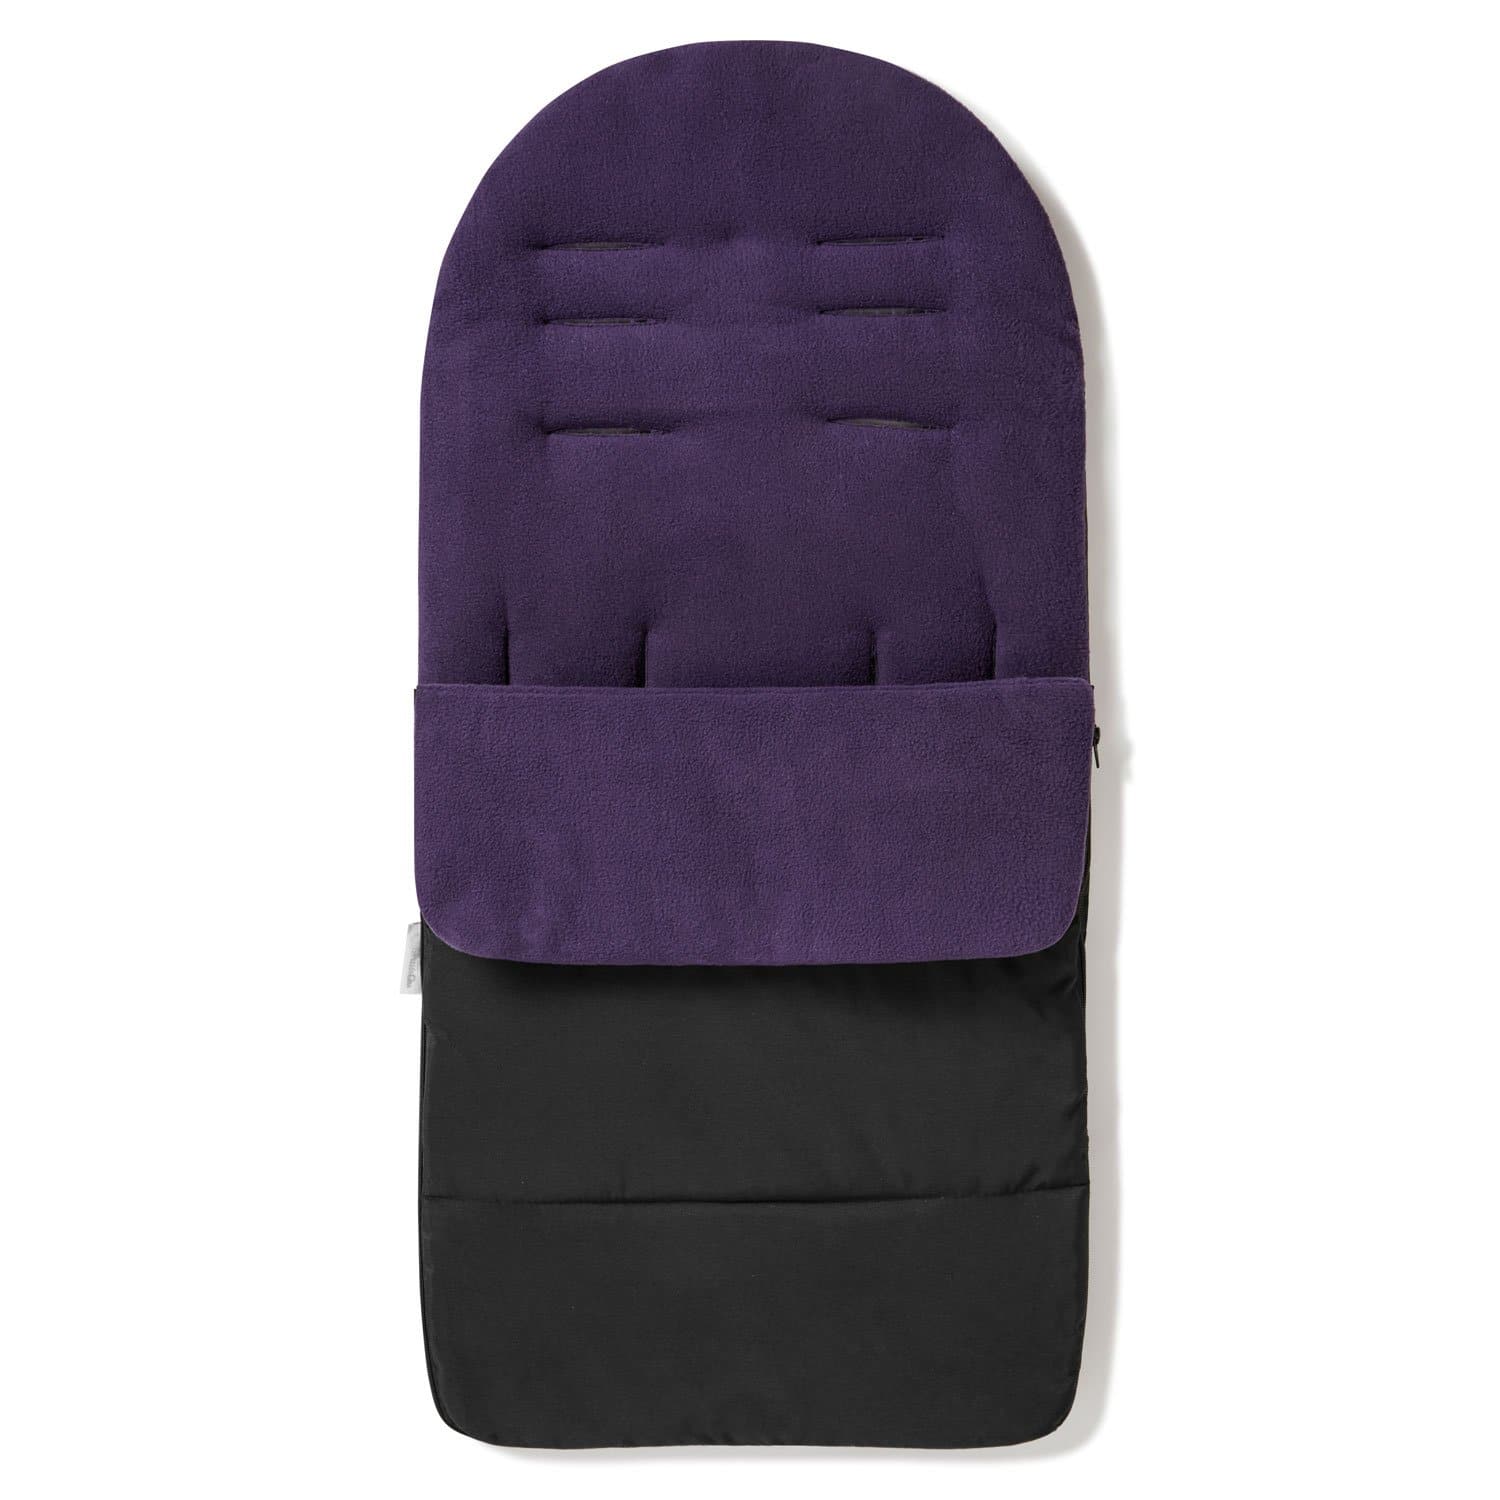 Premium Footmuff / Cosy Toes Compatible with Noukies - Plum Purple / Fits All Models | For Your Little One